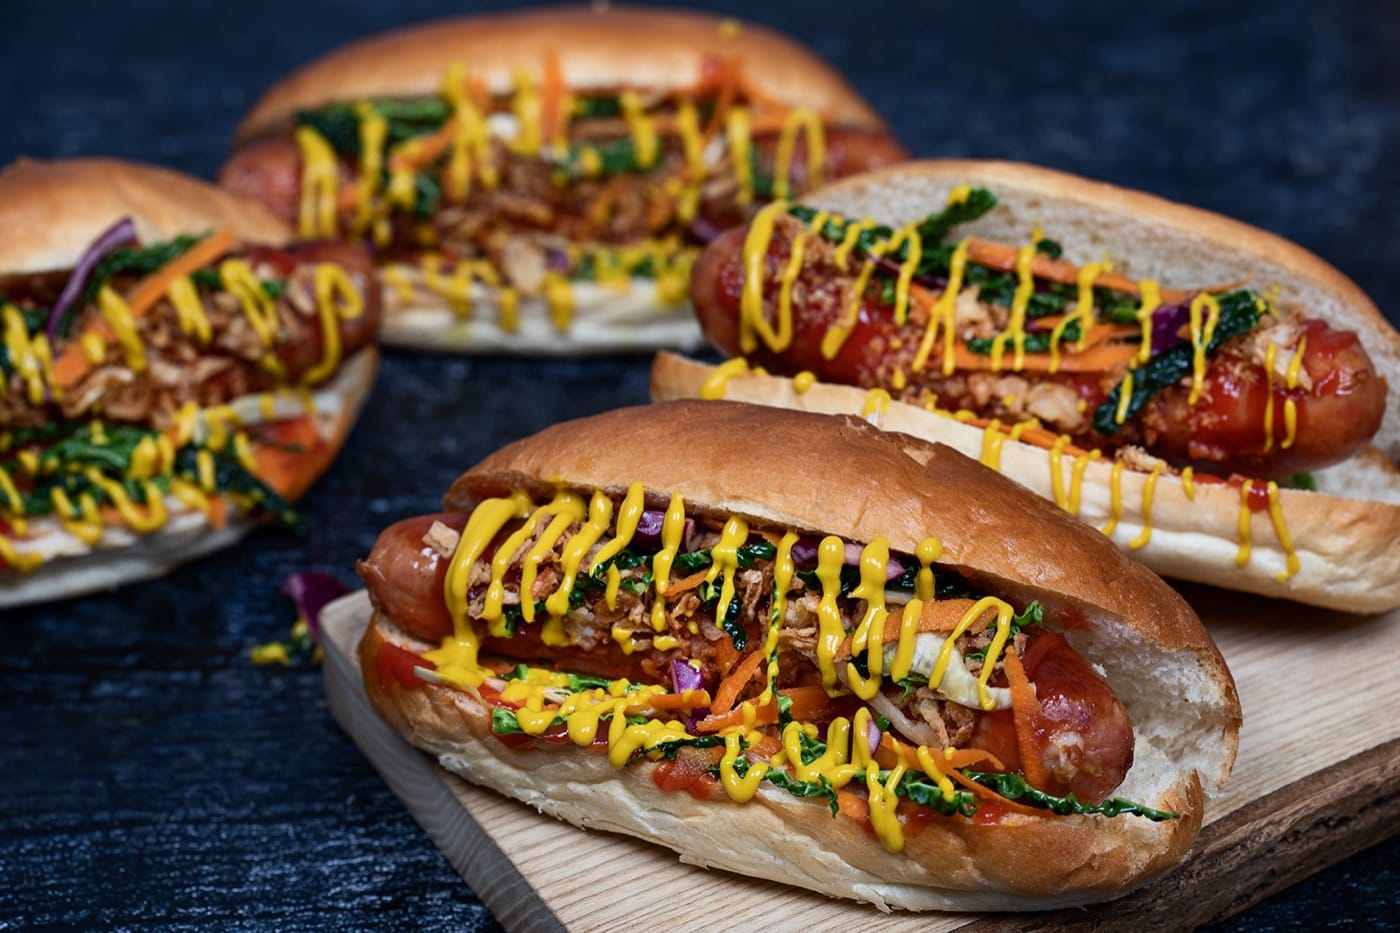 Feast-It-Chillidogs-street-food-caterer-event-catering-hot-dogs-American-food-book-now-two.jpg